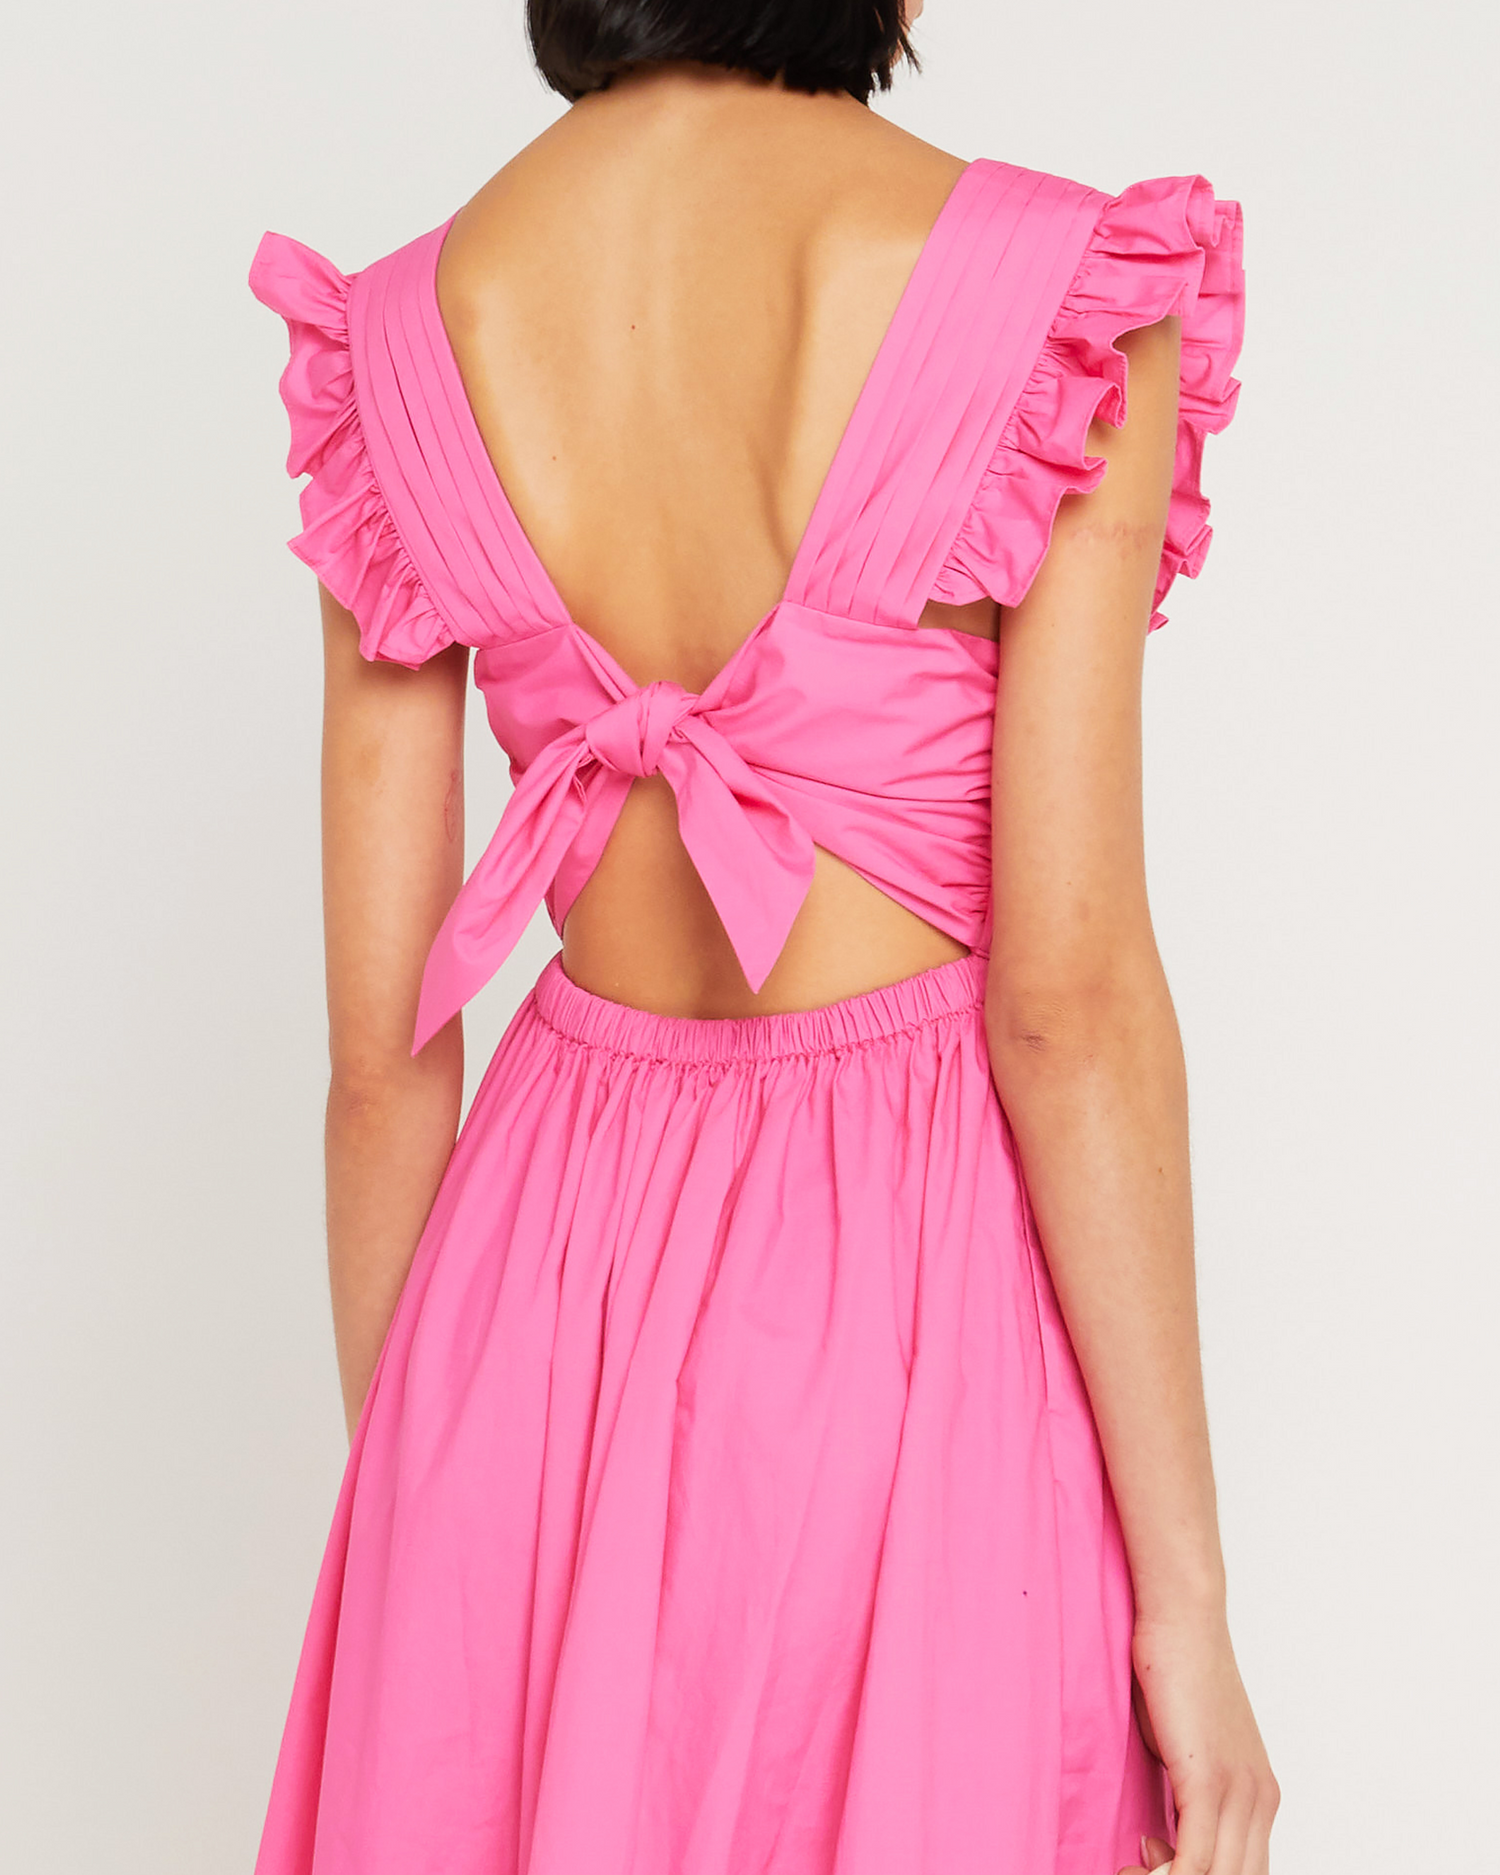 Sixth image of Stella Dress, a pink midi dress, open back, front buttons, ribbon tie, bow, ruffle sleeves